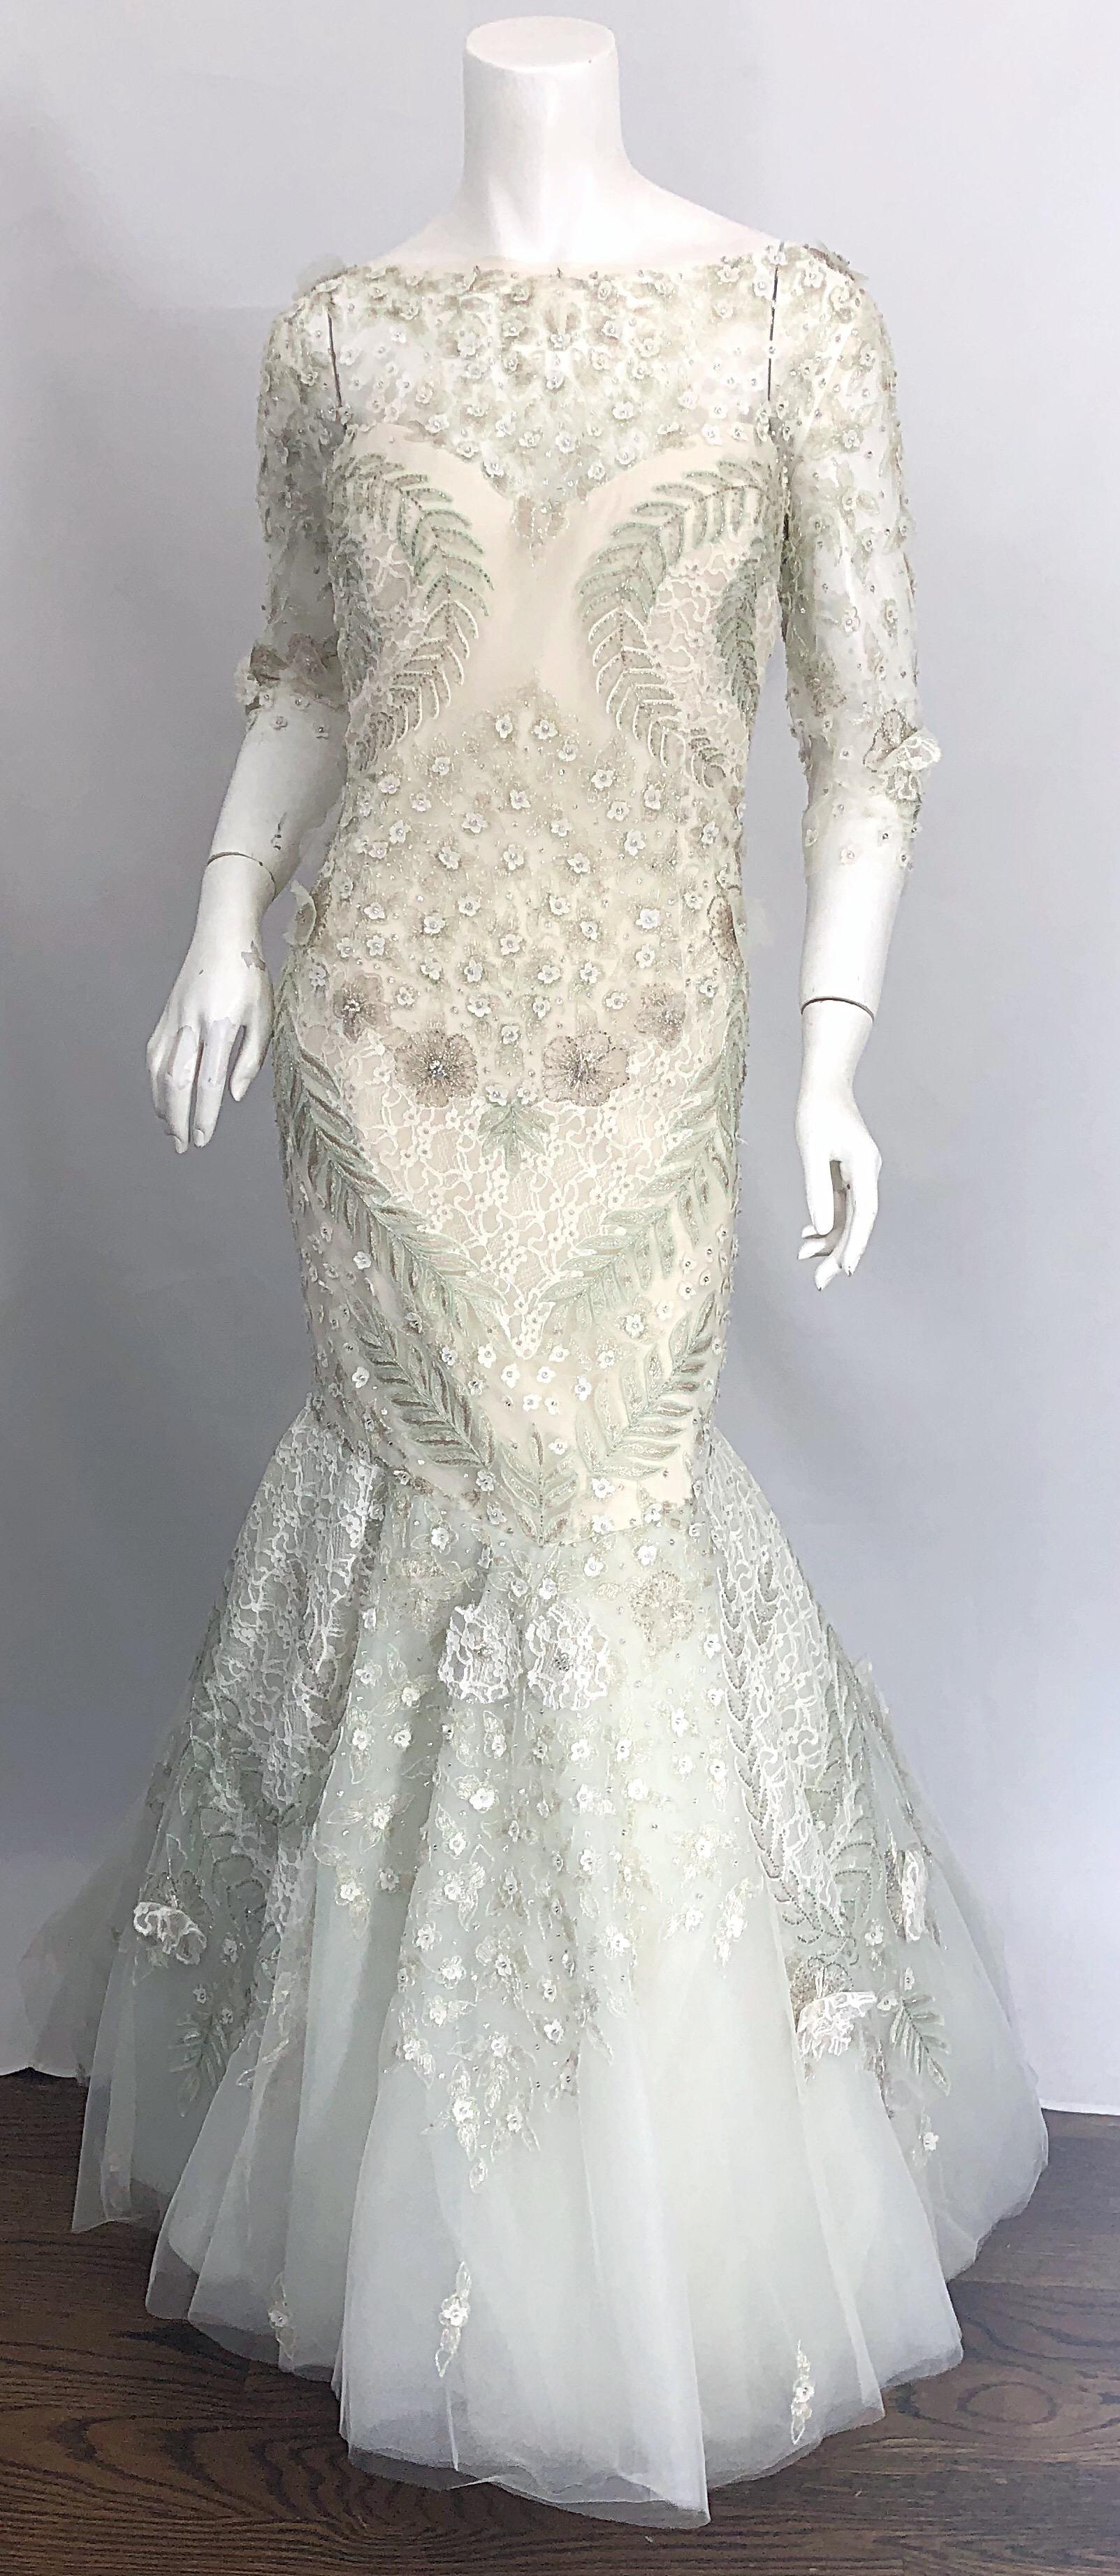 Enchanting MONIQUE LHUILLIER light mint green and ivory beaded, sequined, rhinestone, etc. silk and tulle mermaid gown! This beauty only had one owner, and retailed for over $15,000 when purchased. Entirely hand made, with thousands of hand-sewn